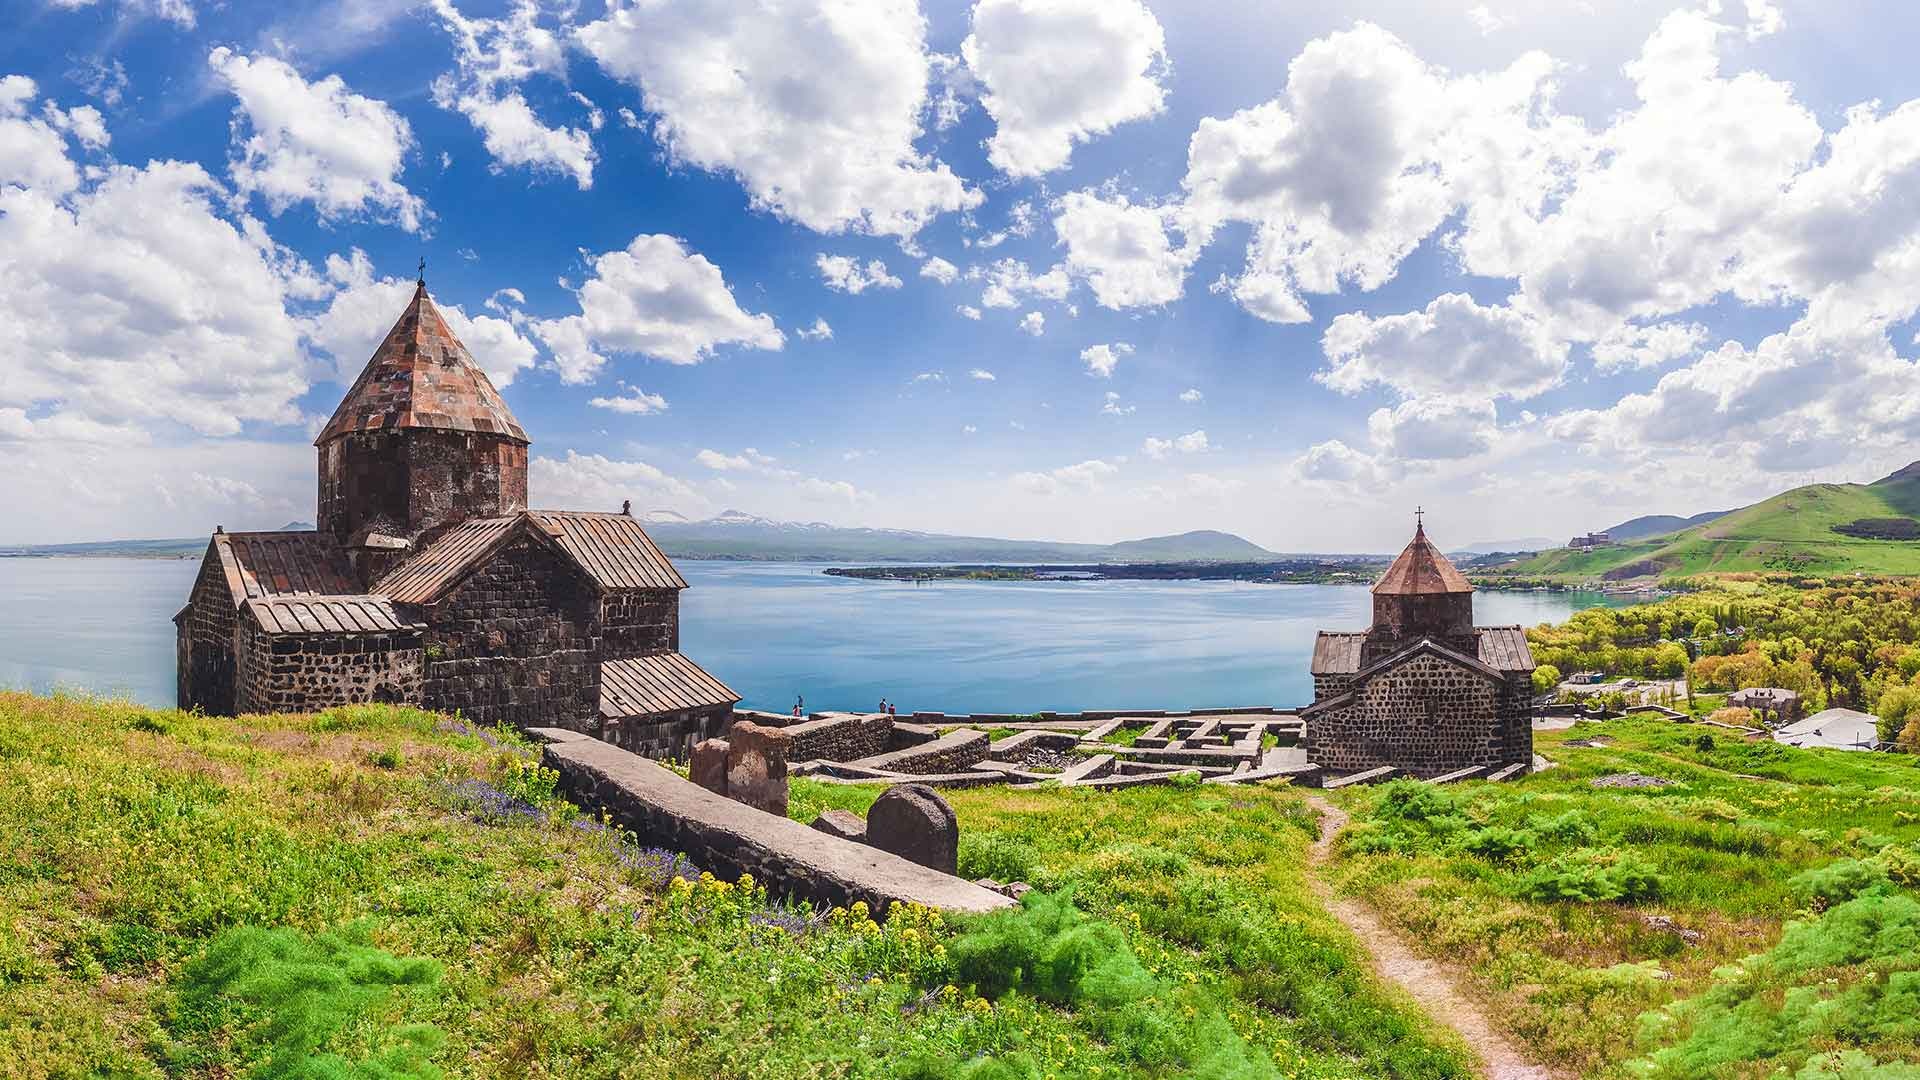 Armenia: Sevan, The largest body of water in the Caucasus region. 1920x1080 Full HD Background.